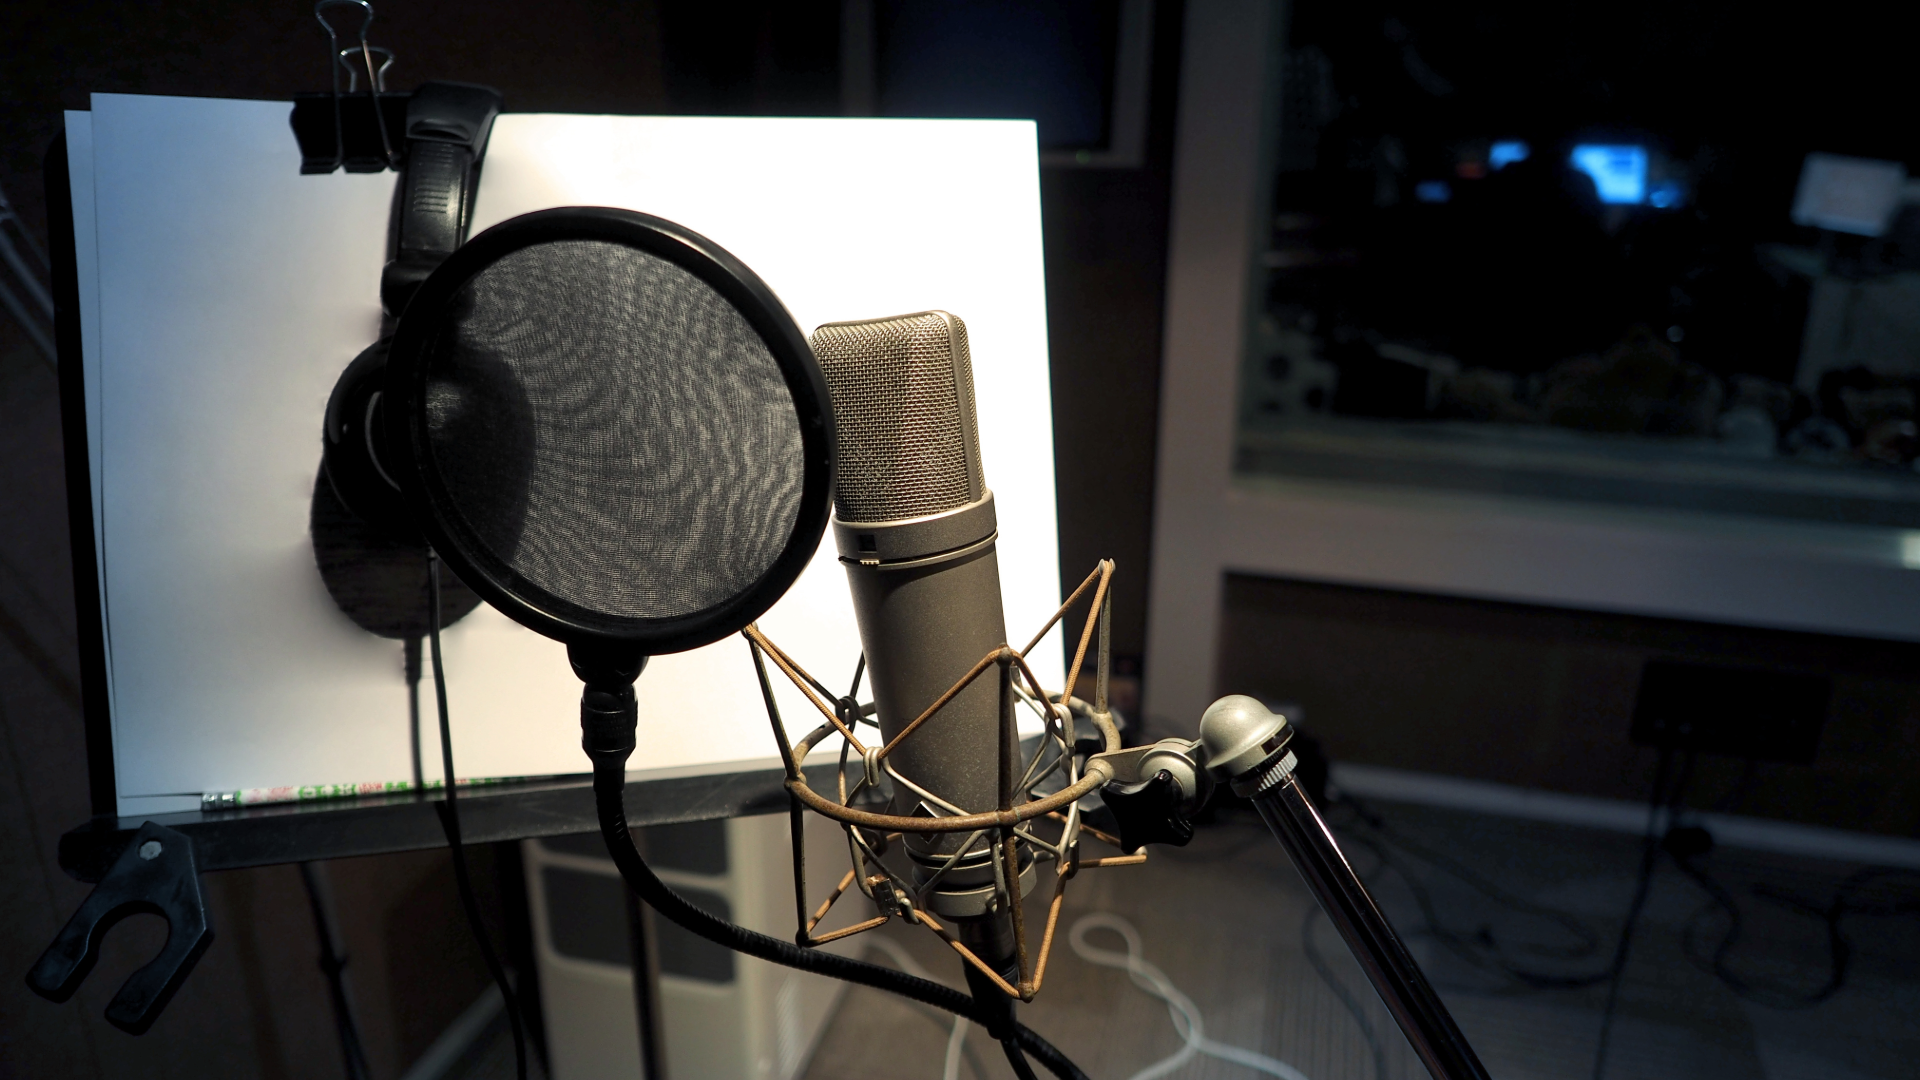 Professional Voice Over